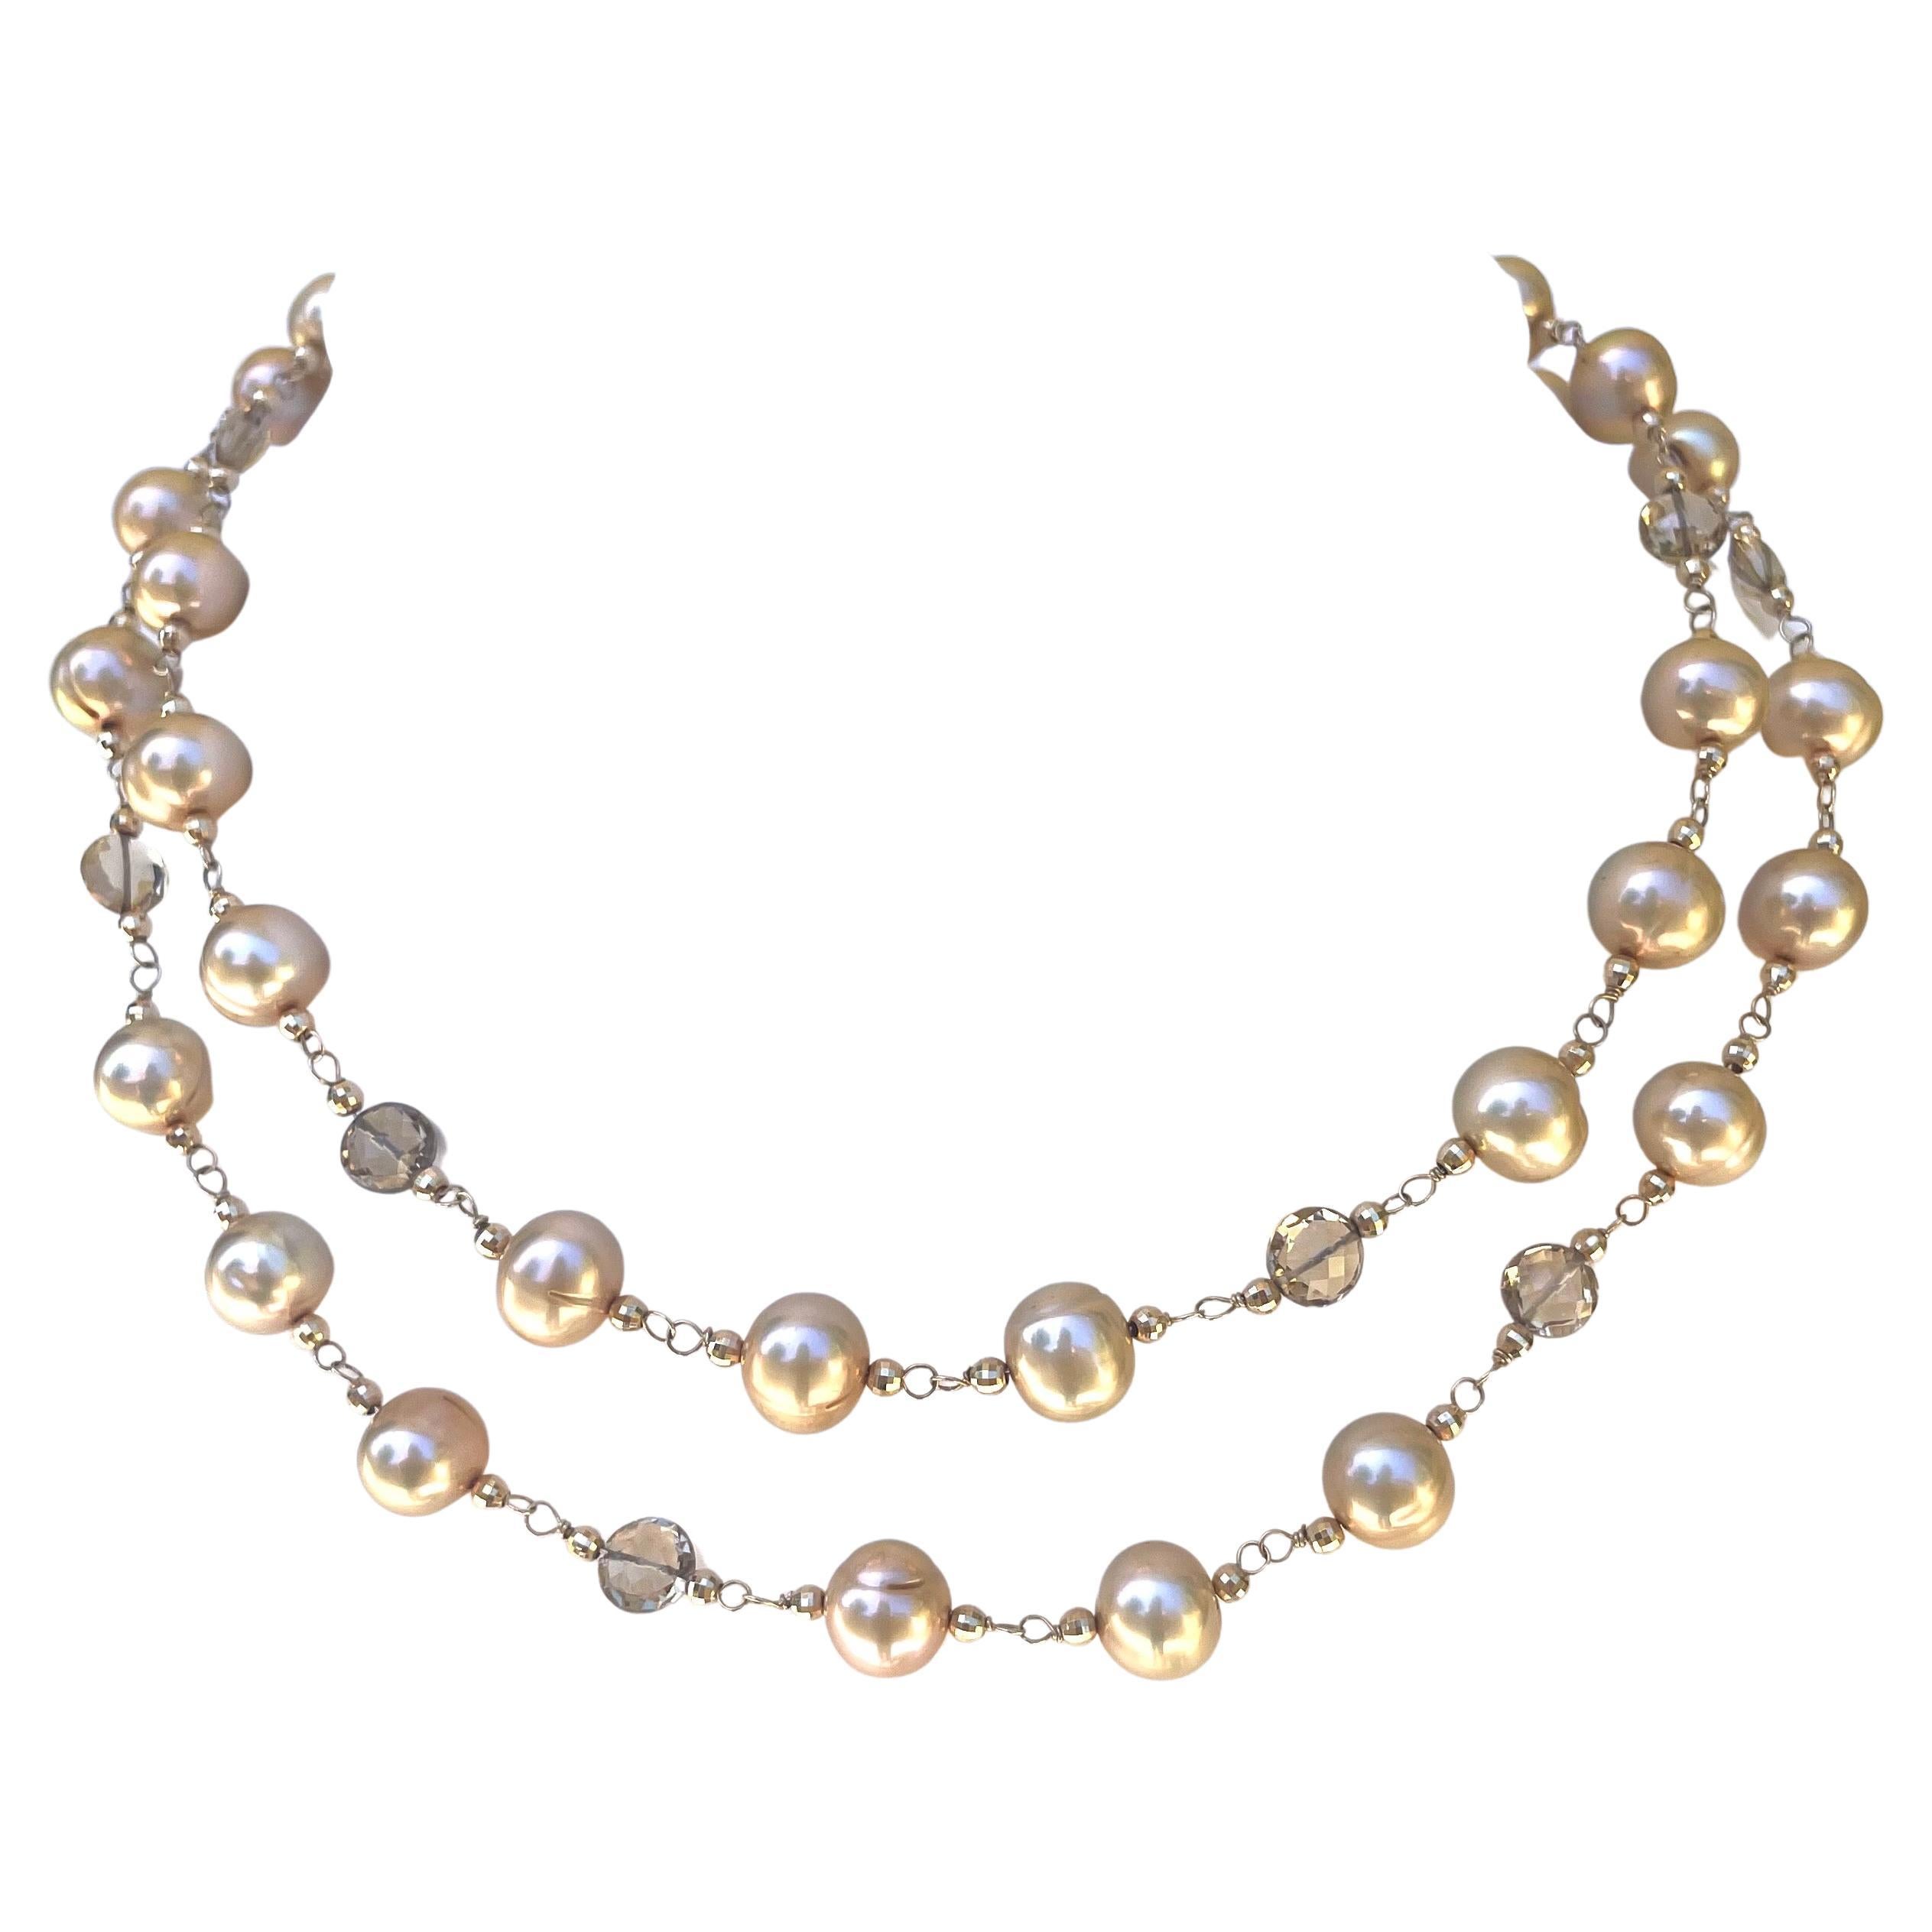 Artisan Golden Pearl Necklace with Champagne Citrine Accents For Sale